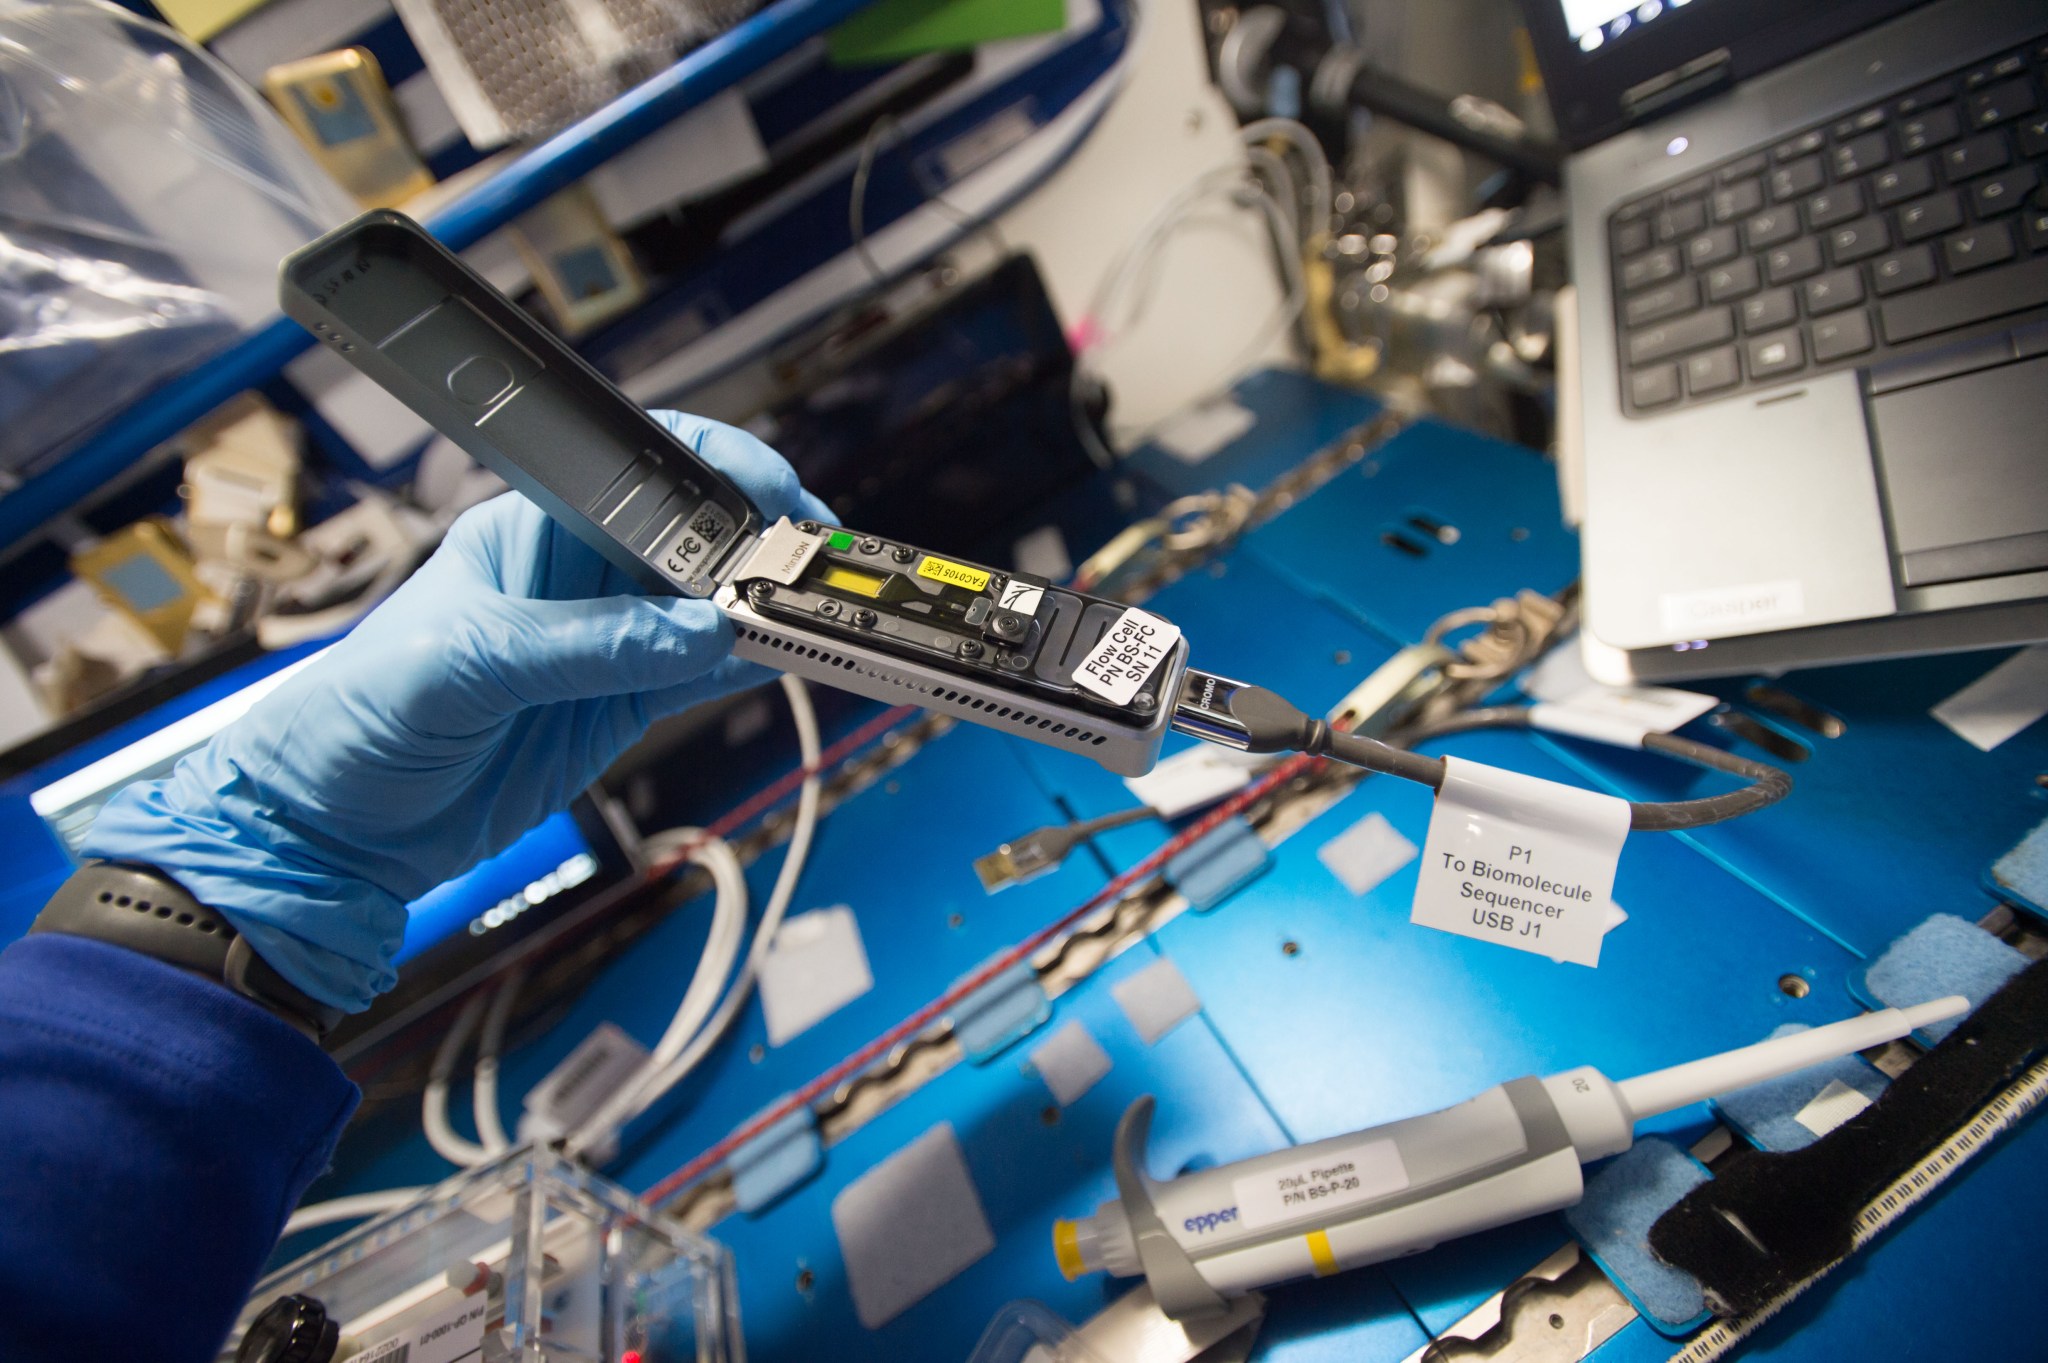 The MinION DNA sequencer in use on the space station. Credits: NASA Alt text: A blue-gloved hand holds a rectangular palm-sized device. The lid of the device is open revealing a small yellow cell and some labels. There is a USB  cord coming out of the end of the device.